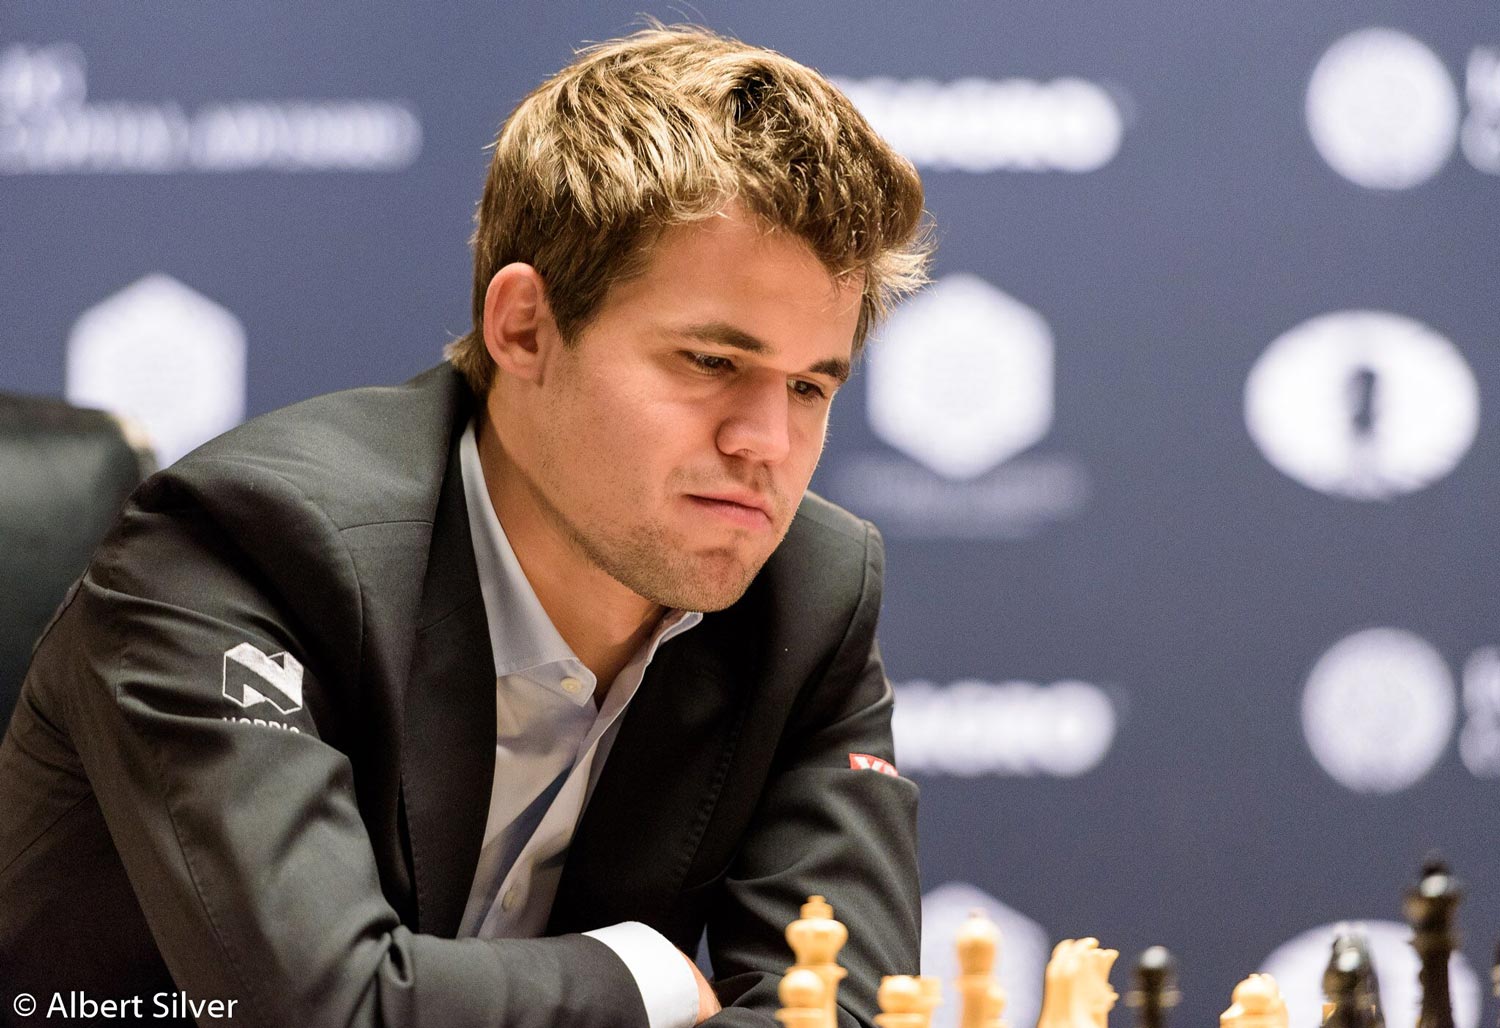 Novel opening produces another draw in Carlsen-Caruana world chess match -  Washington Times